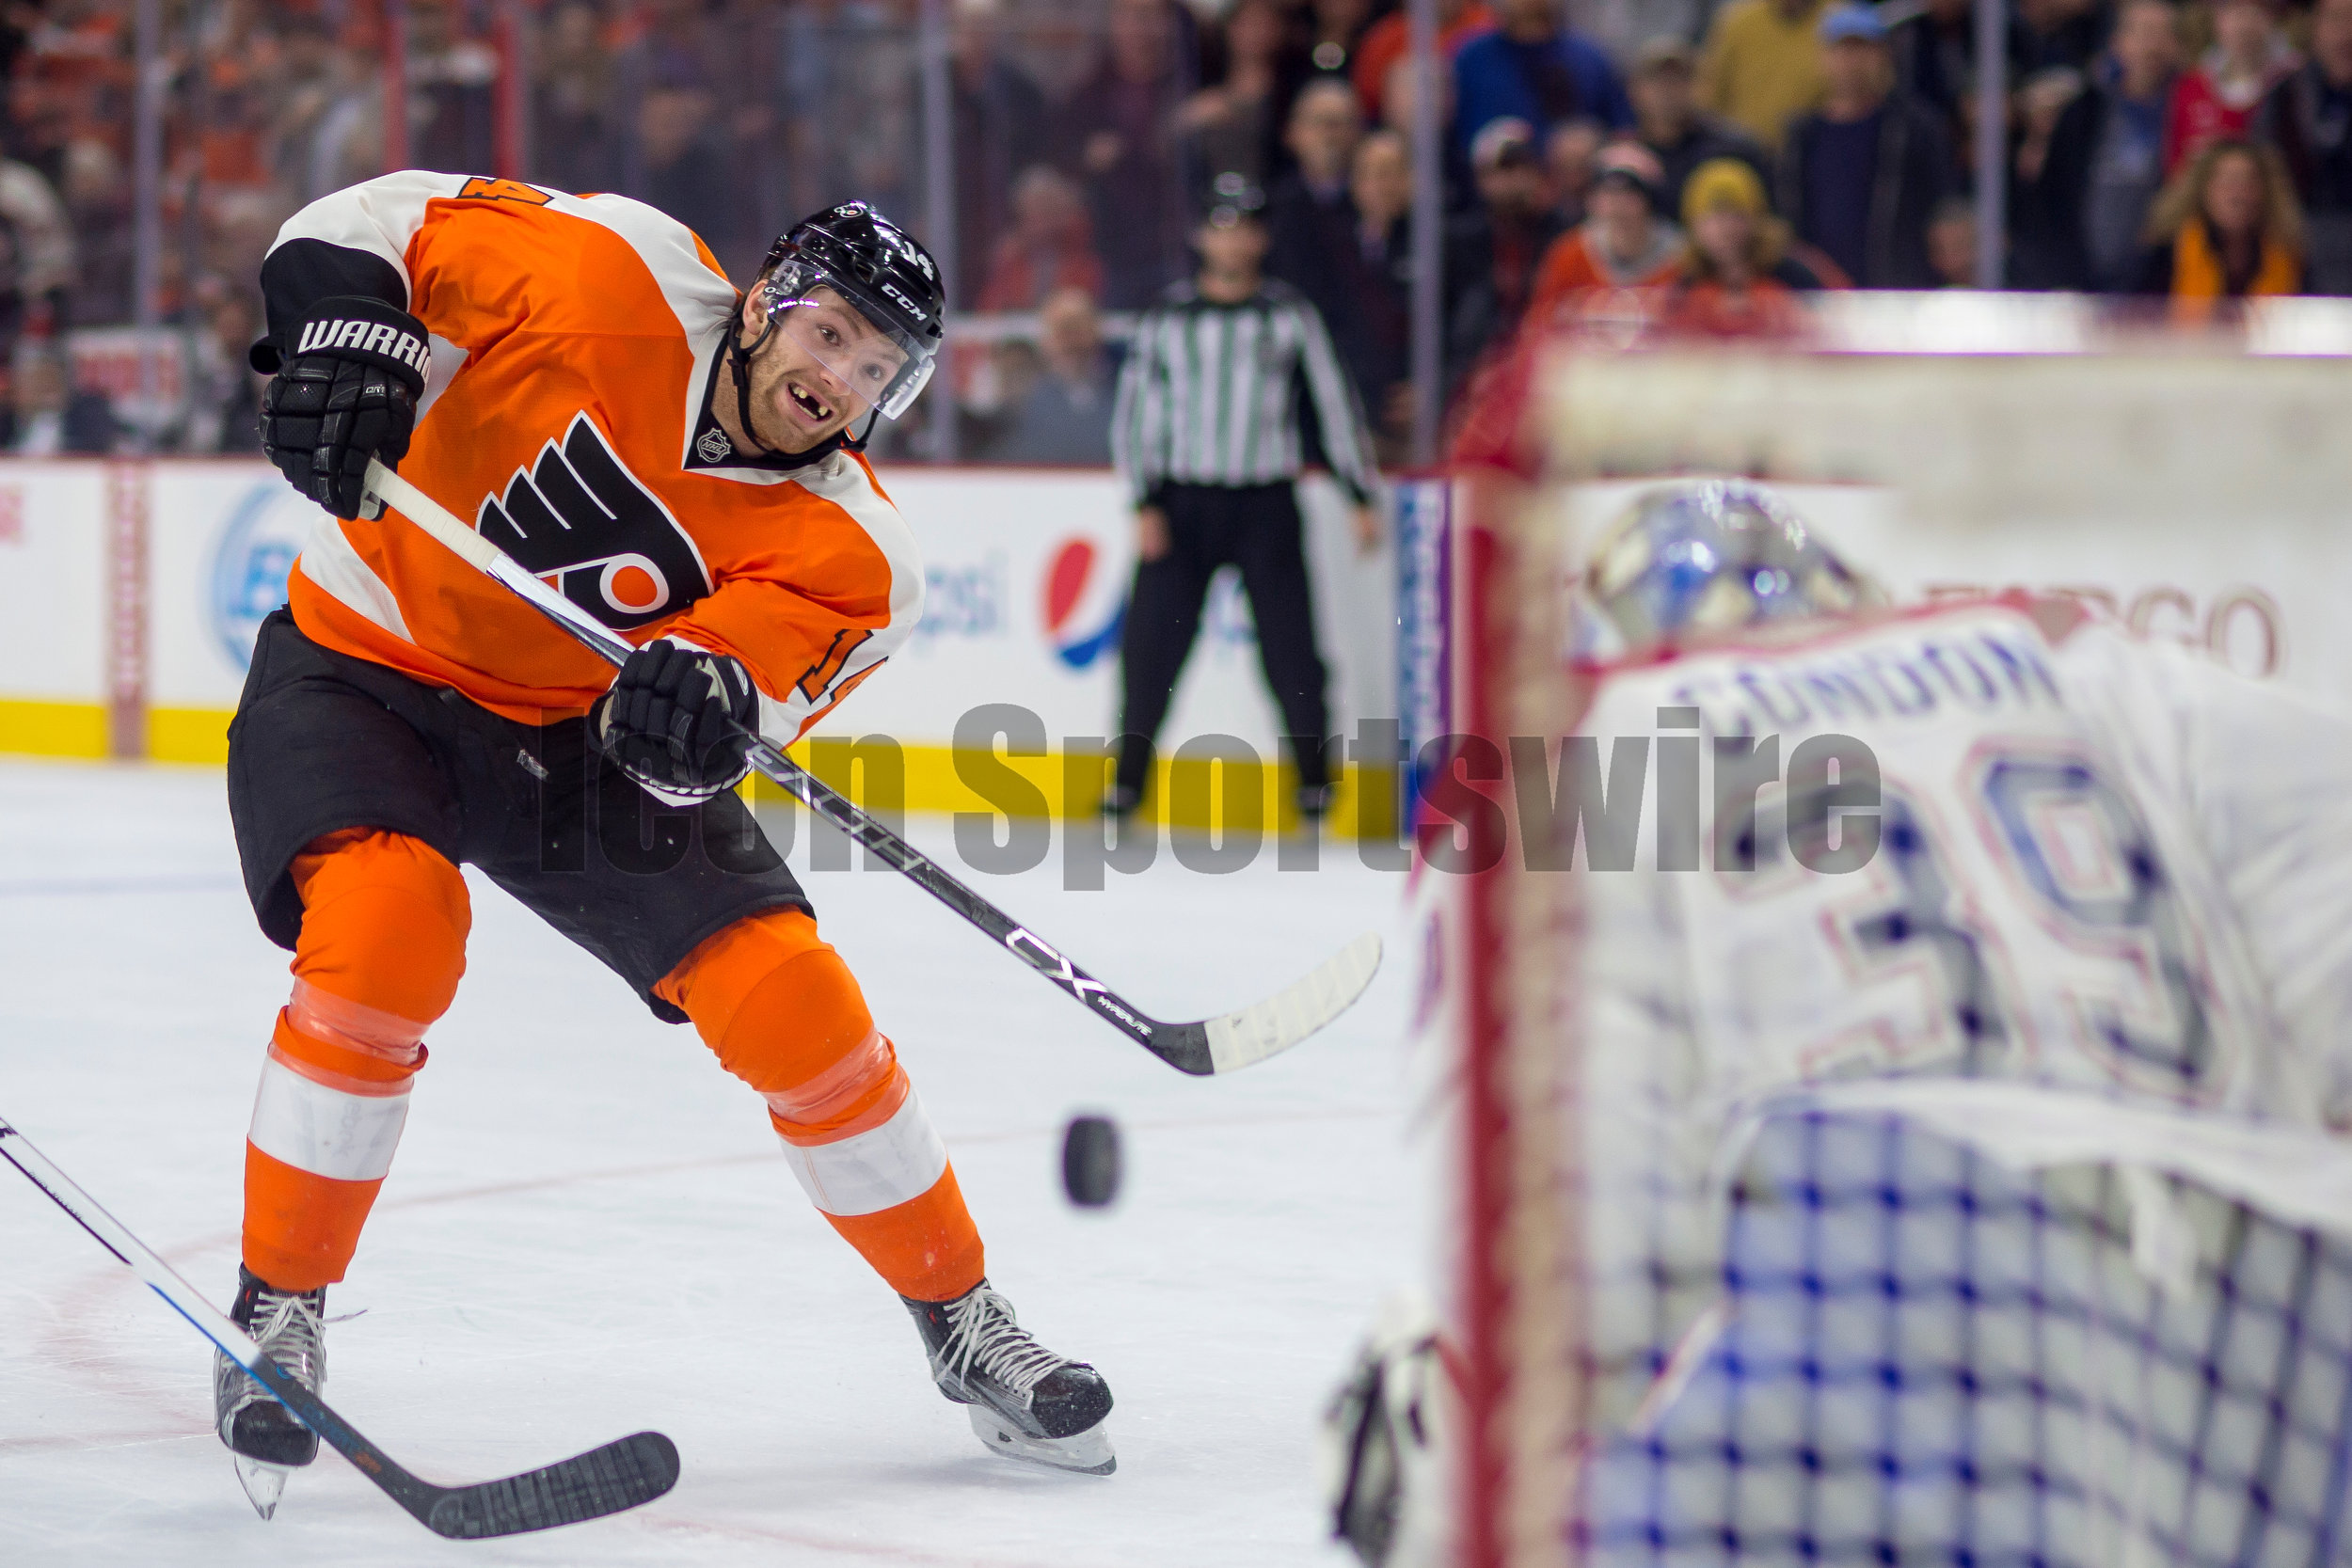  02 February 2016: Philadelphia Flyers center Sean Couturier (14) fires a shot at the goal during the NHL game between the Montreal Canadiens and the Philadelphia Flyers played at the Wells Fargo Center in Philadelphia, PA. (Photo by Gavin Baker/Icon